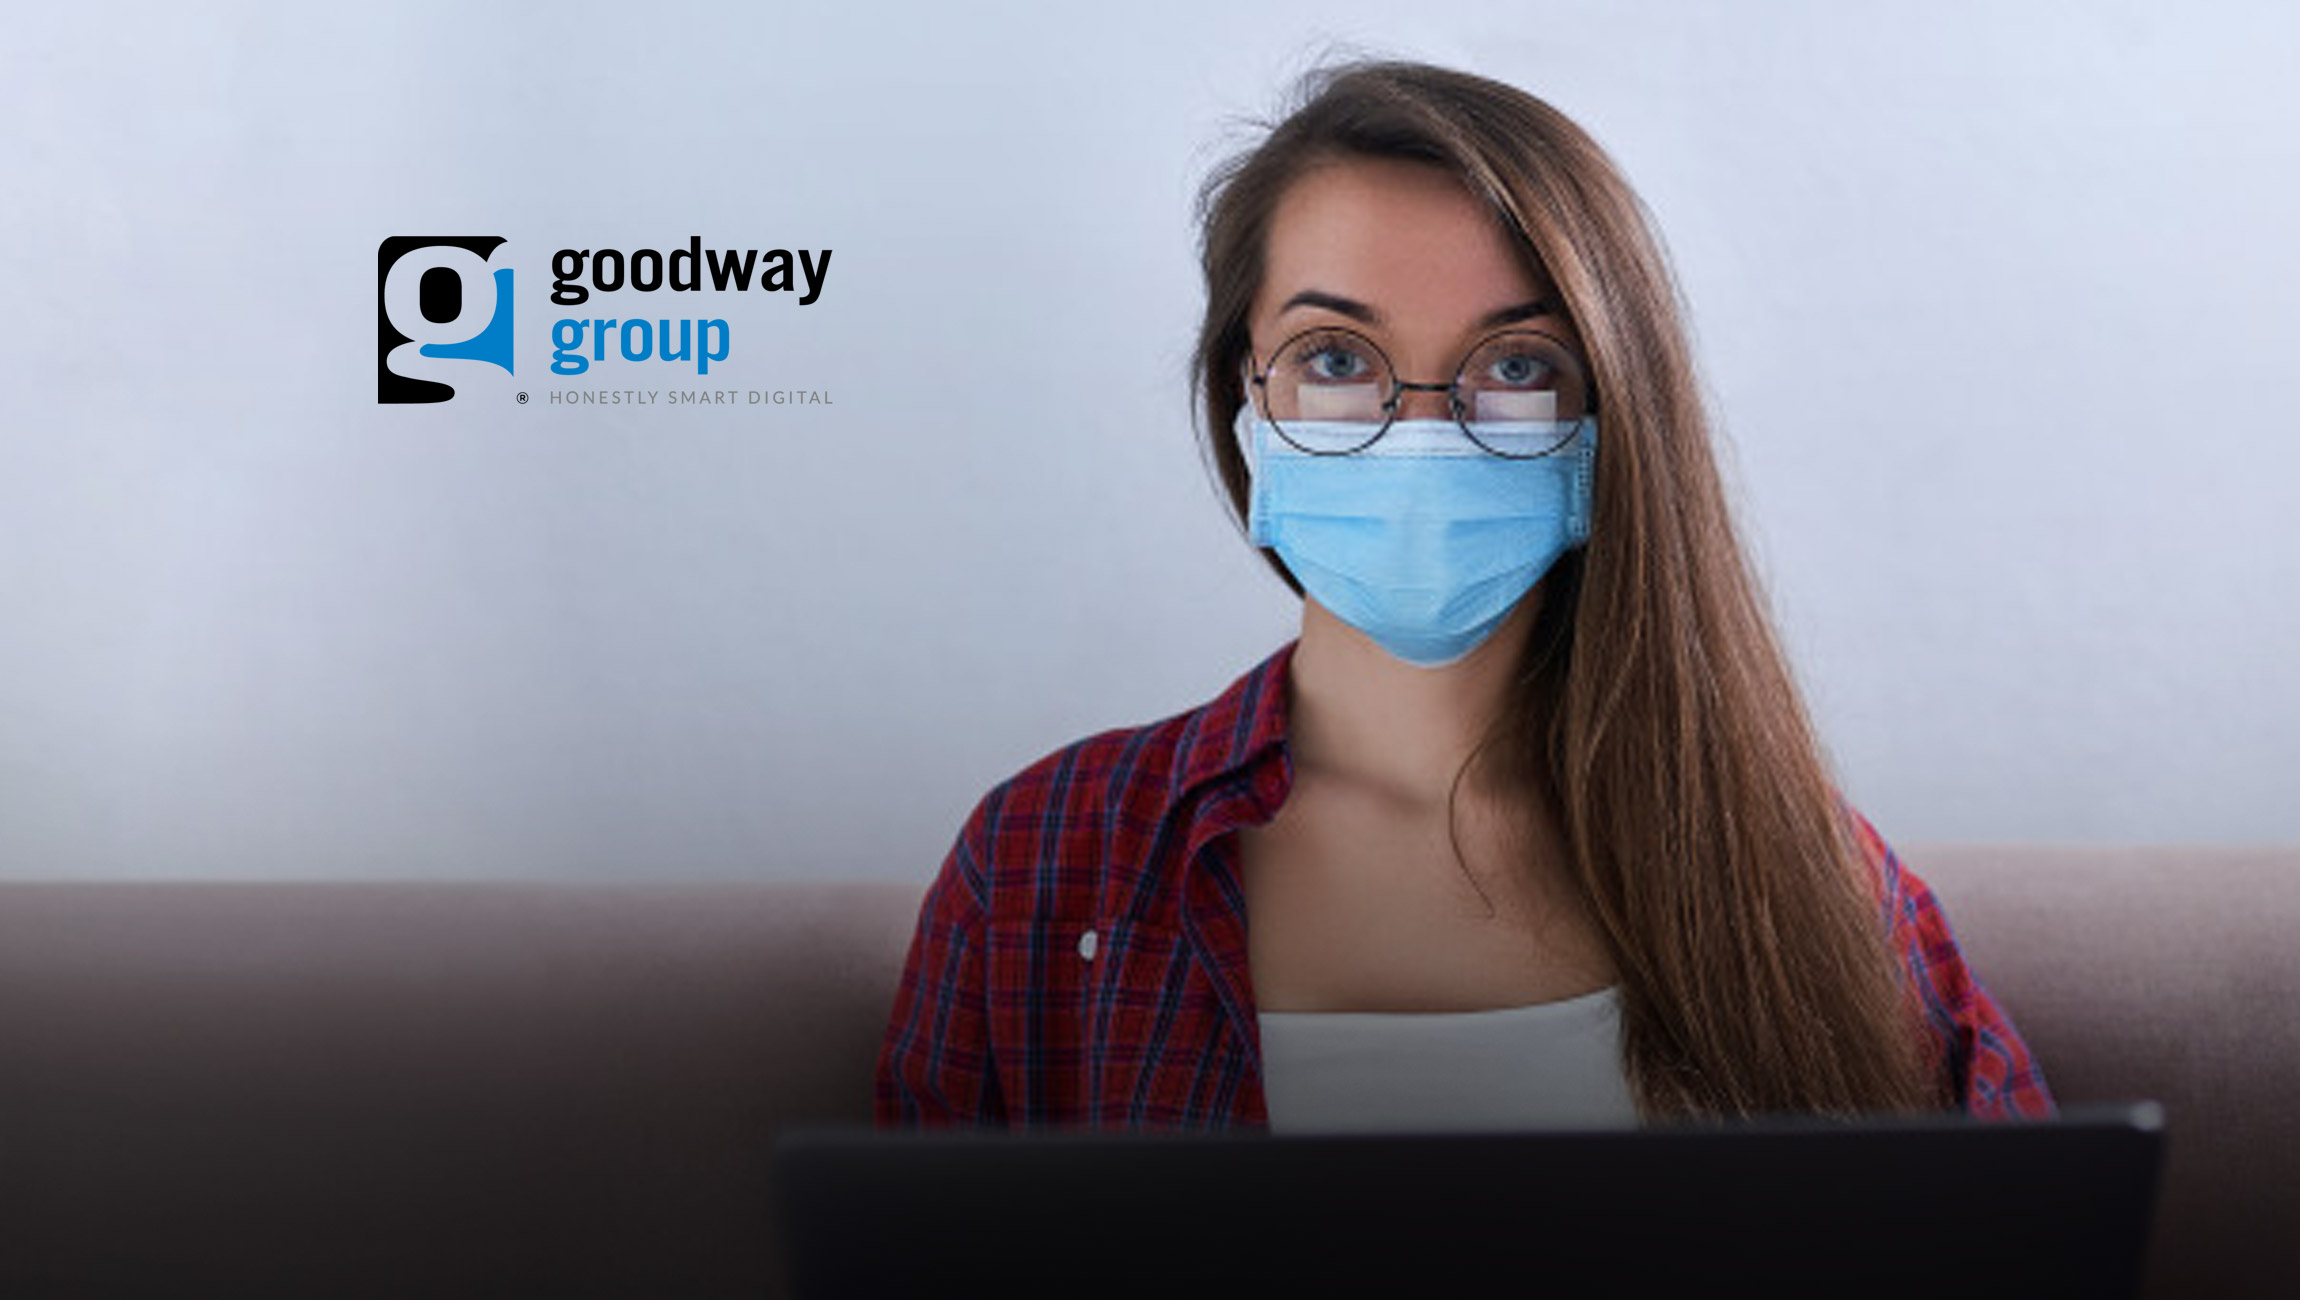 goodway group